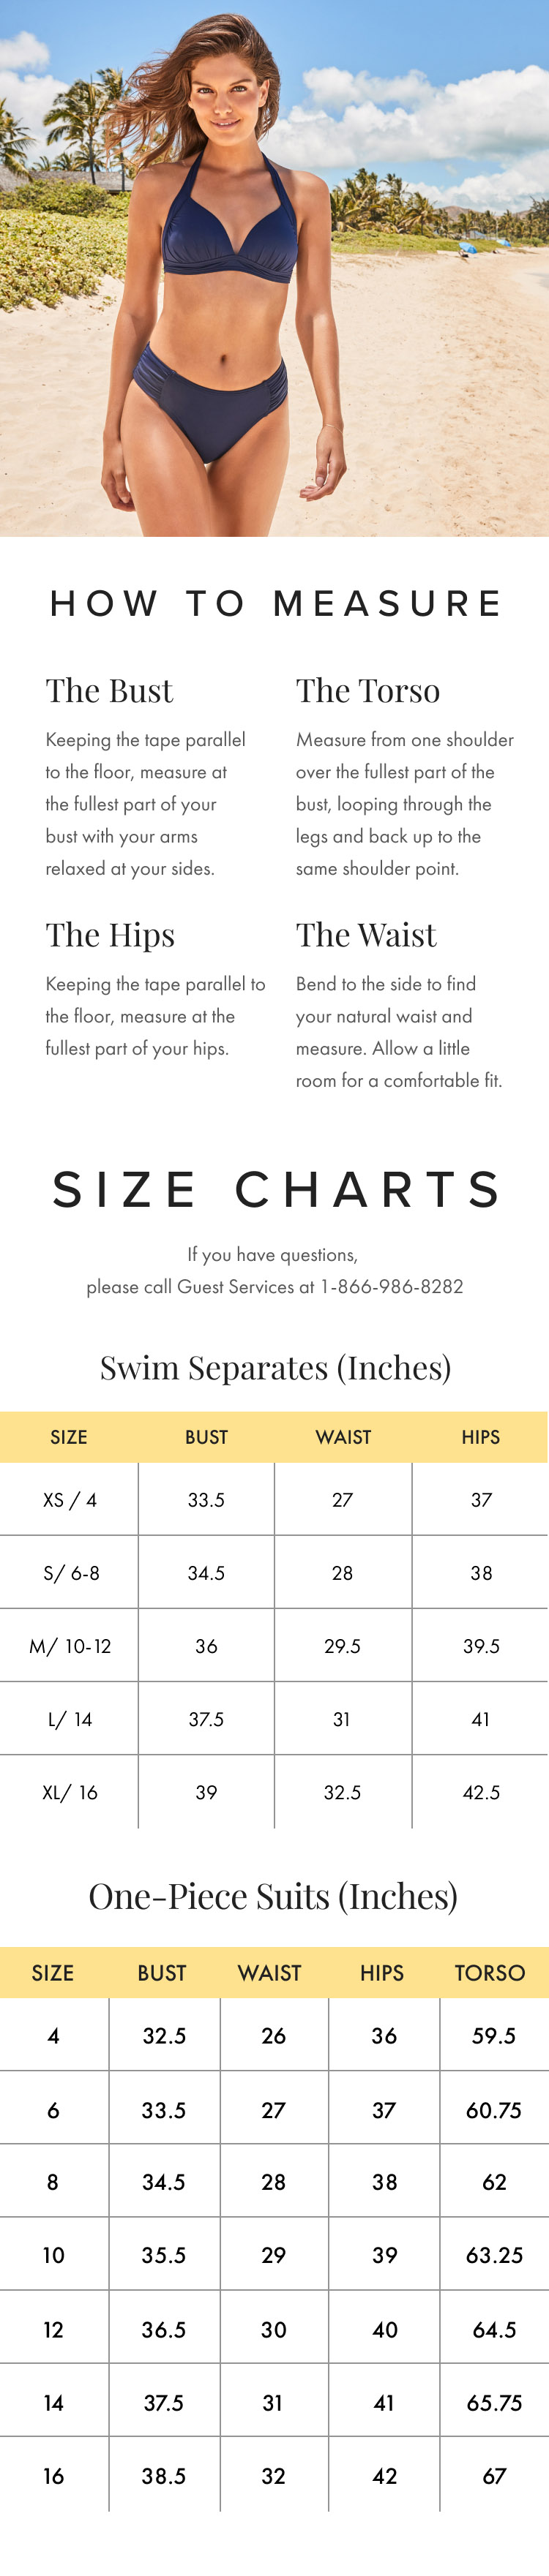 How To Measure/Size Charts